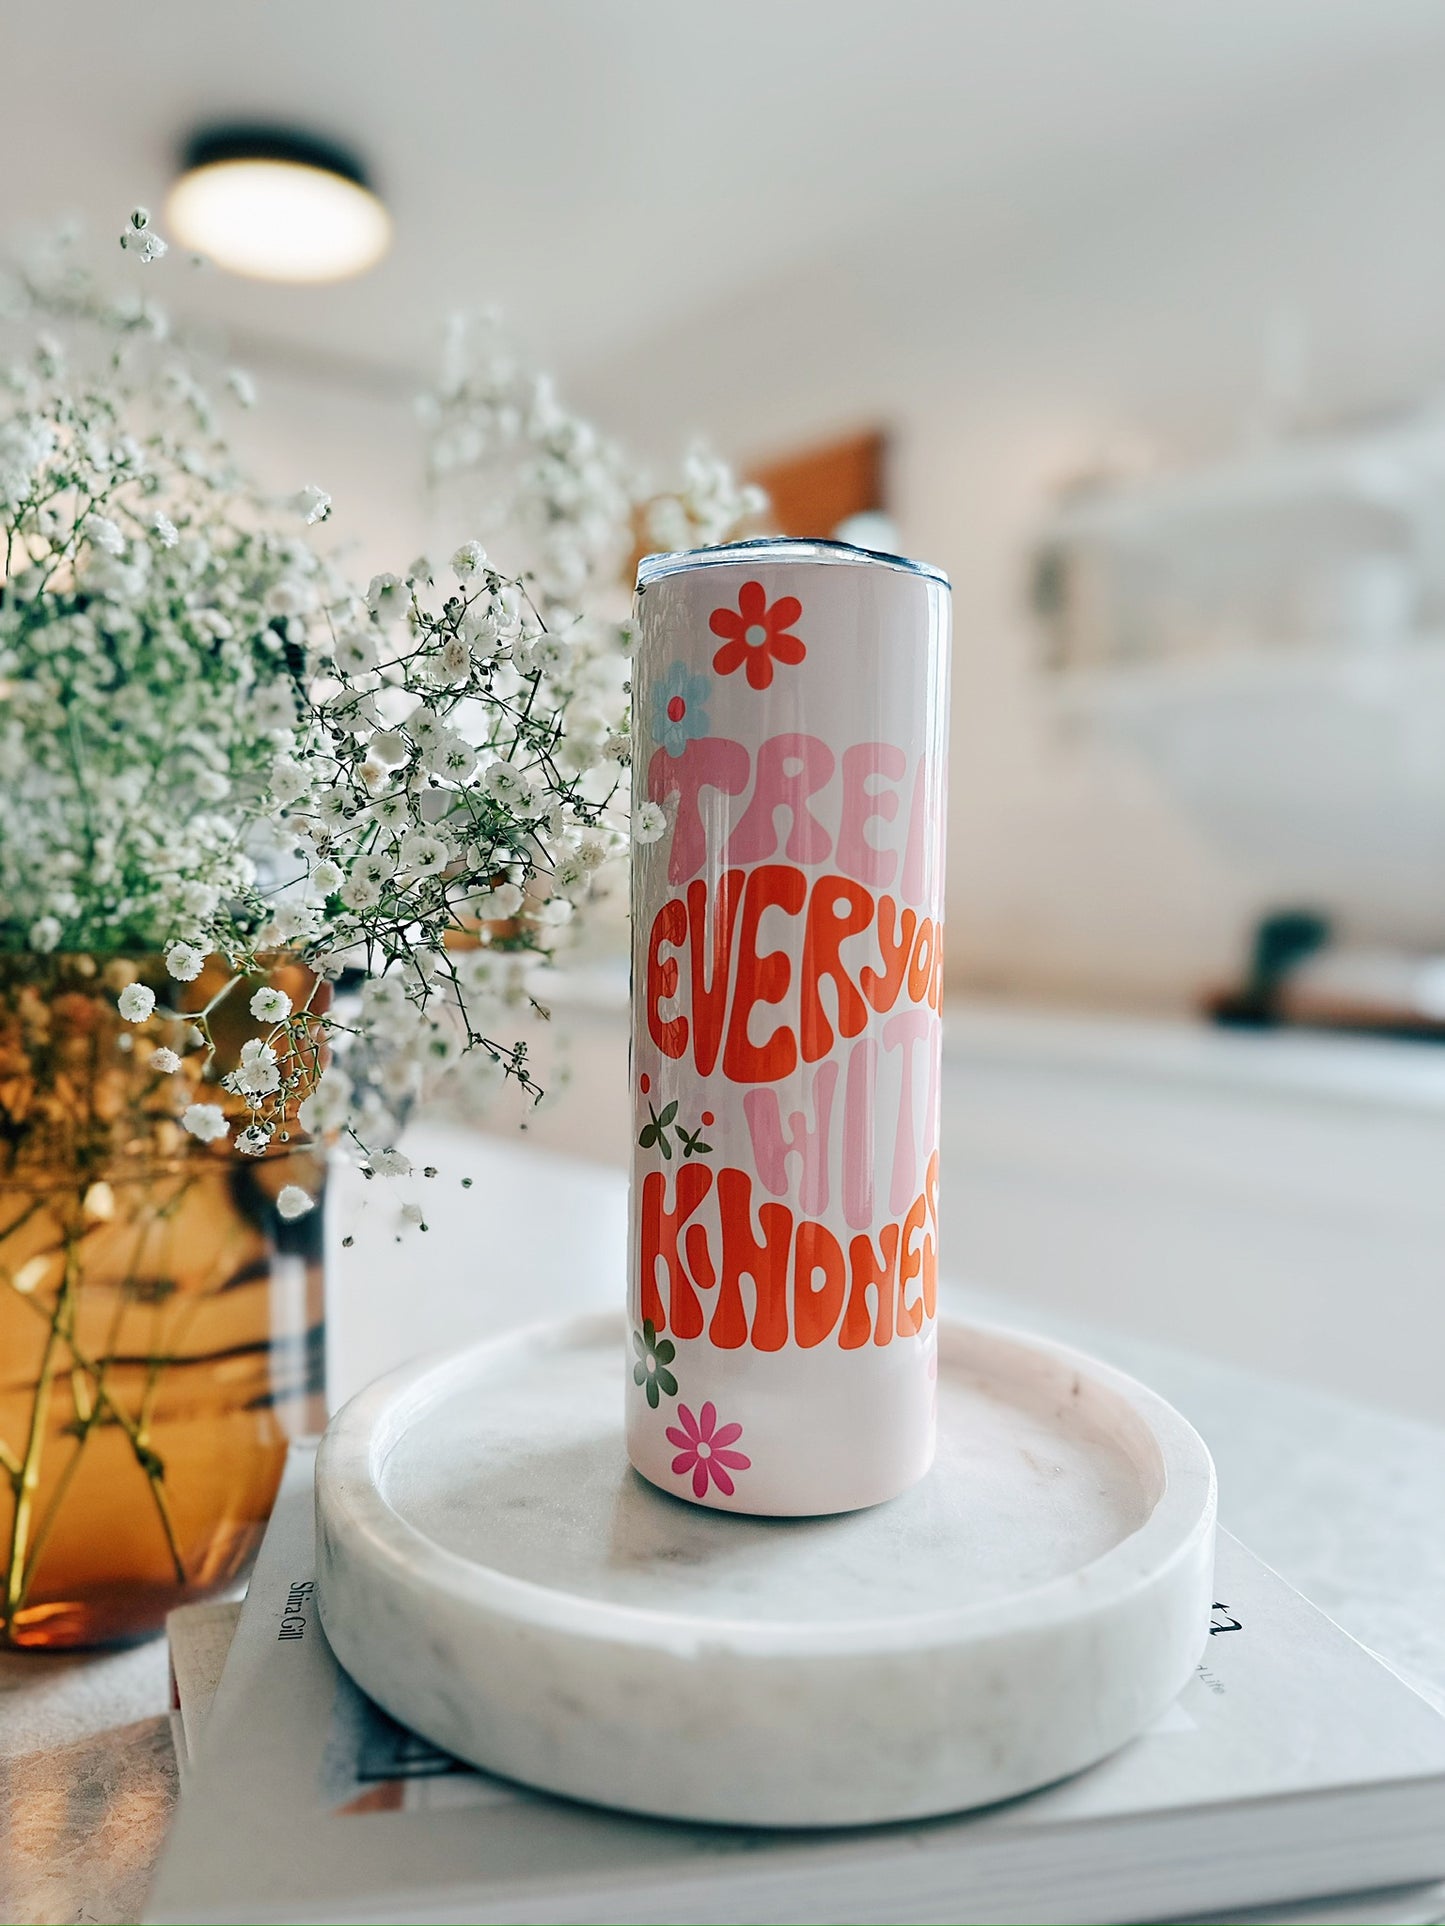 Treat Everyone With Kindness - Floral 20oz skinny Tumbler